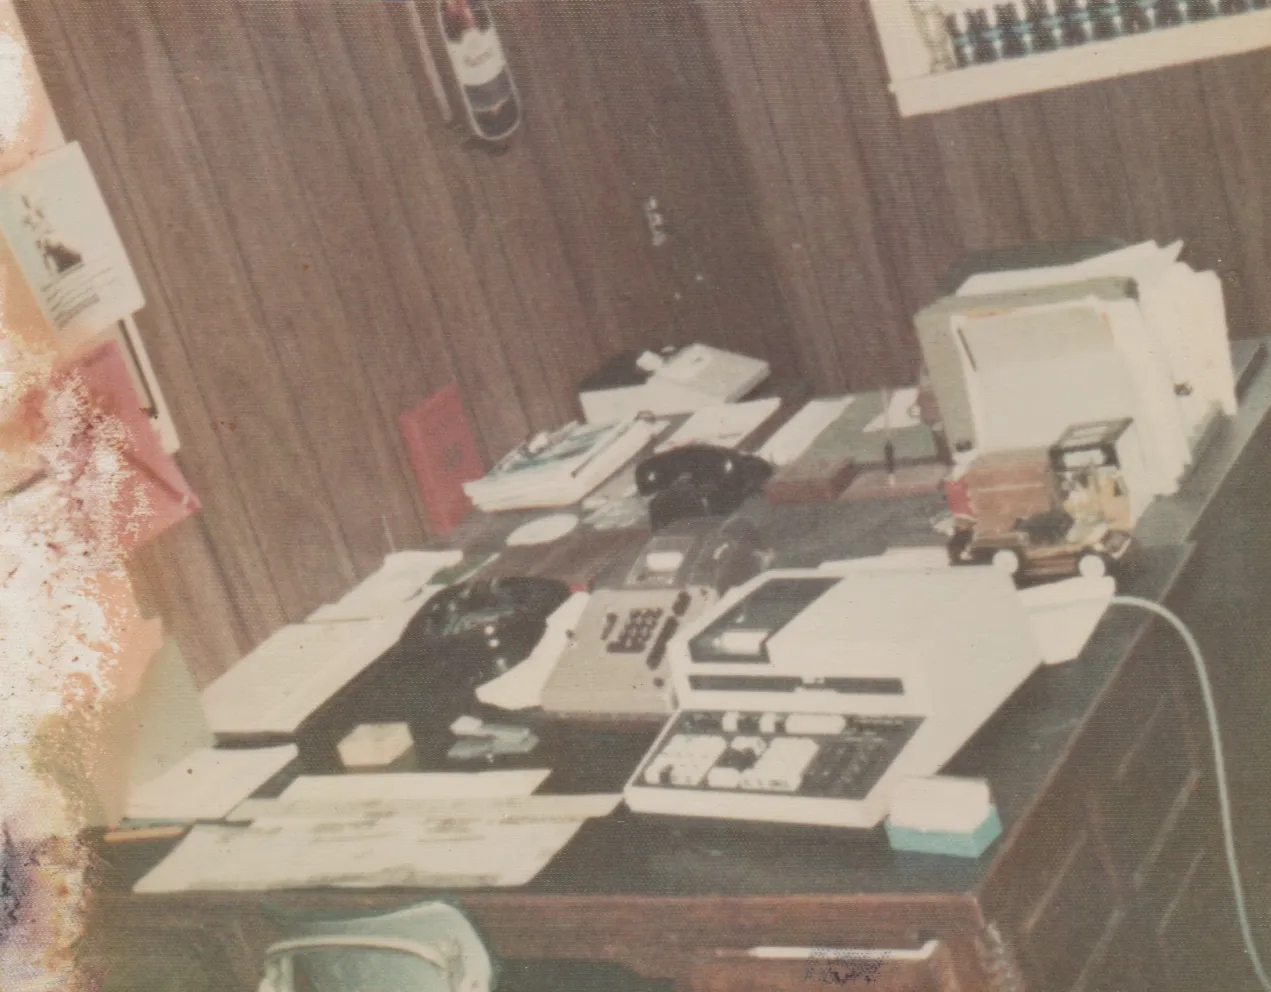 1970's maybe - marilyn's desk at work maybe.jpg